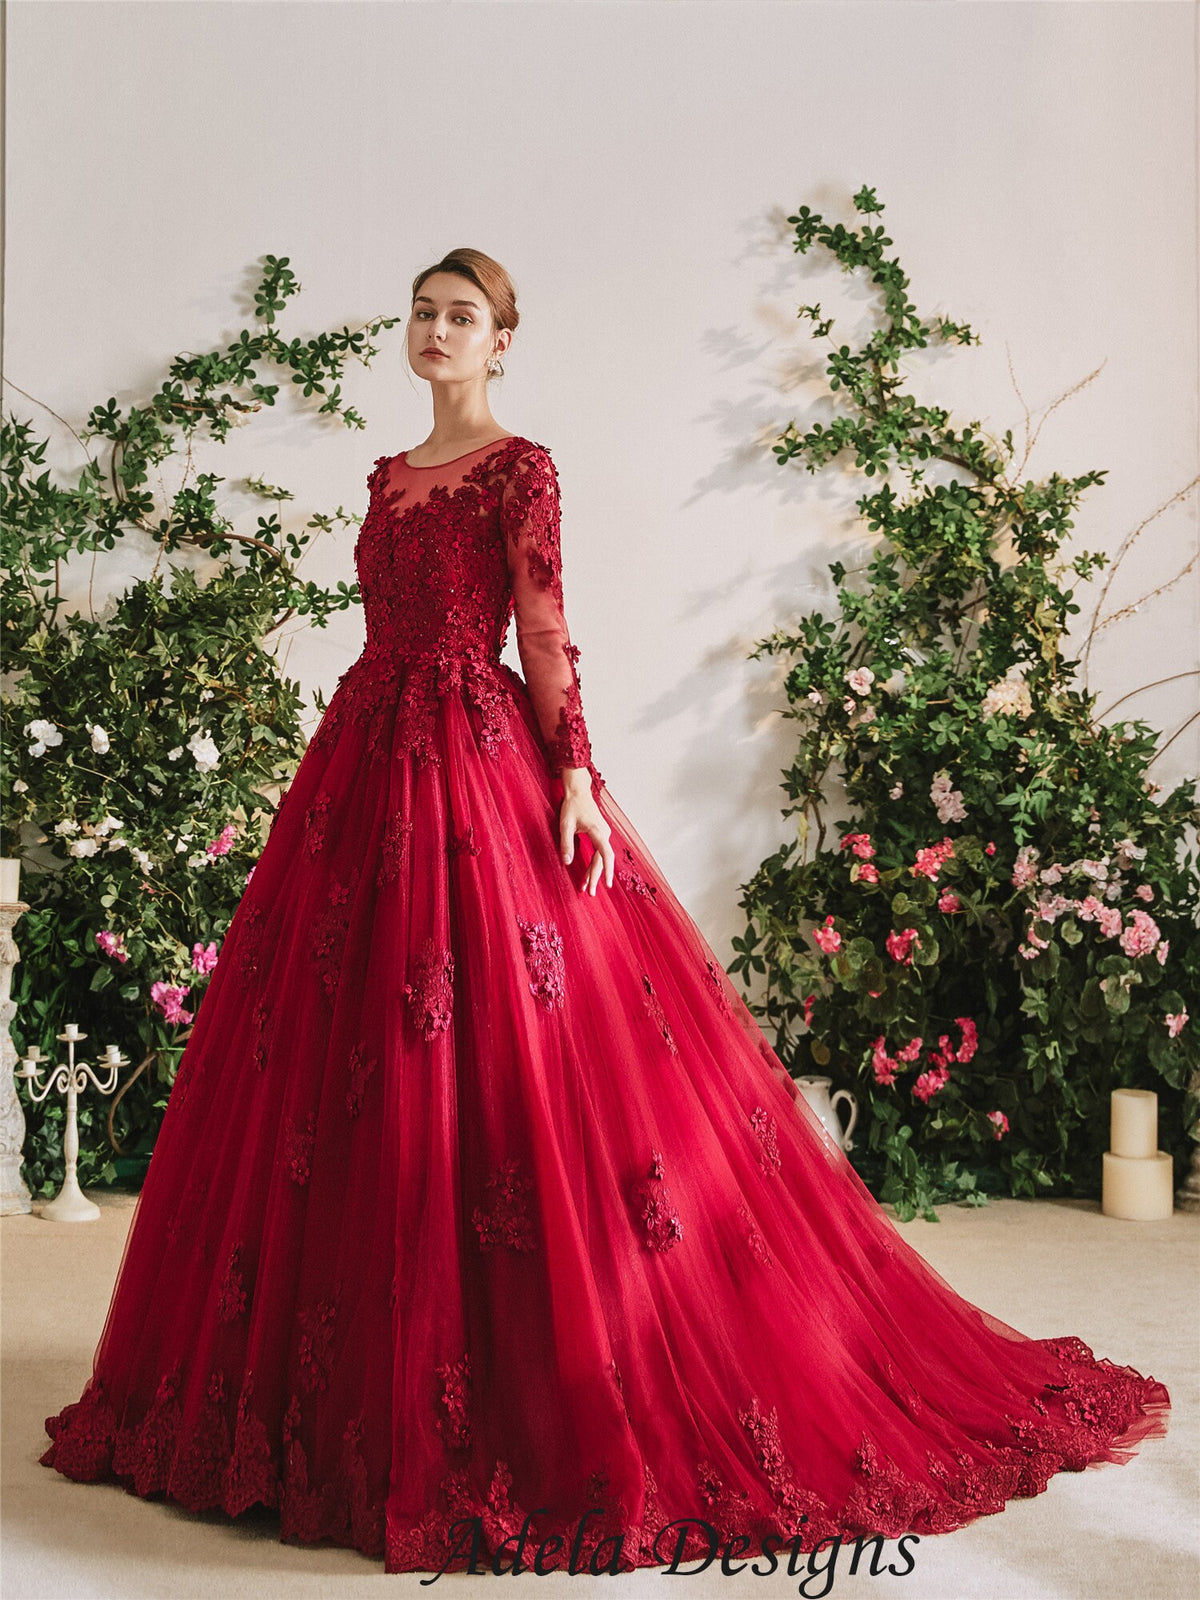 Unconventional Dark Red Bridal Ball Gown Colorful Wedding Dress Full Classic Long Sleeve 3d Flowers Illusion Neckline Full Aline Ball Gown